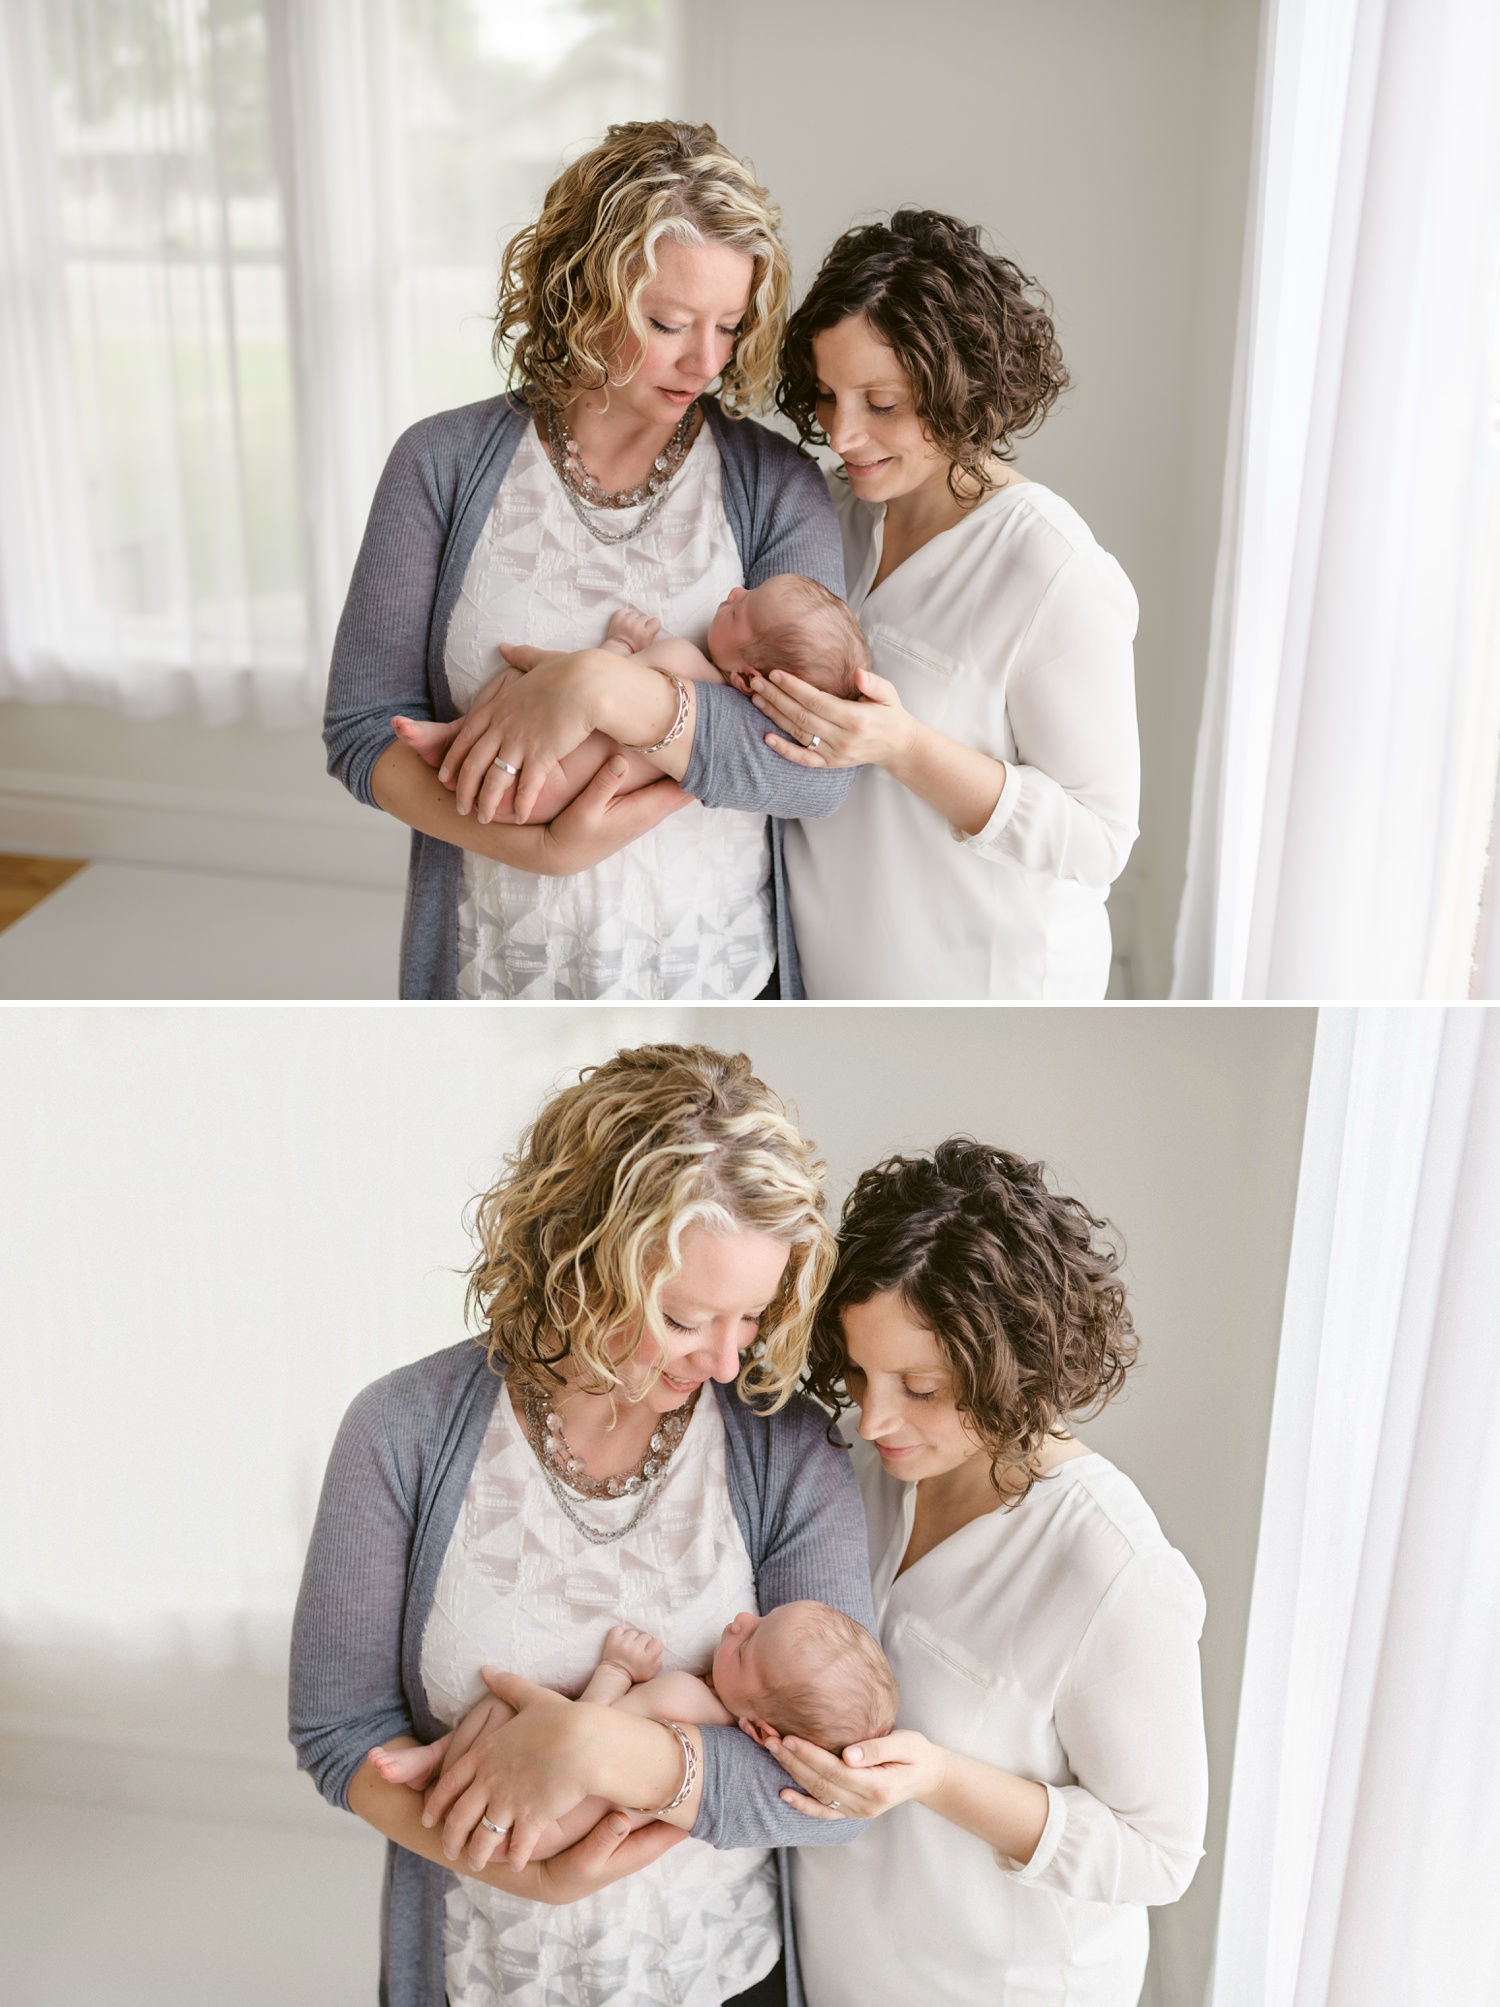 My Top 7 Posing Tips for Mom so You CAN Get Pinterest-Worthy Photos with Your Newborn